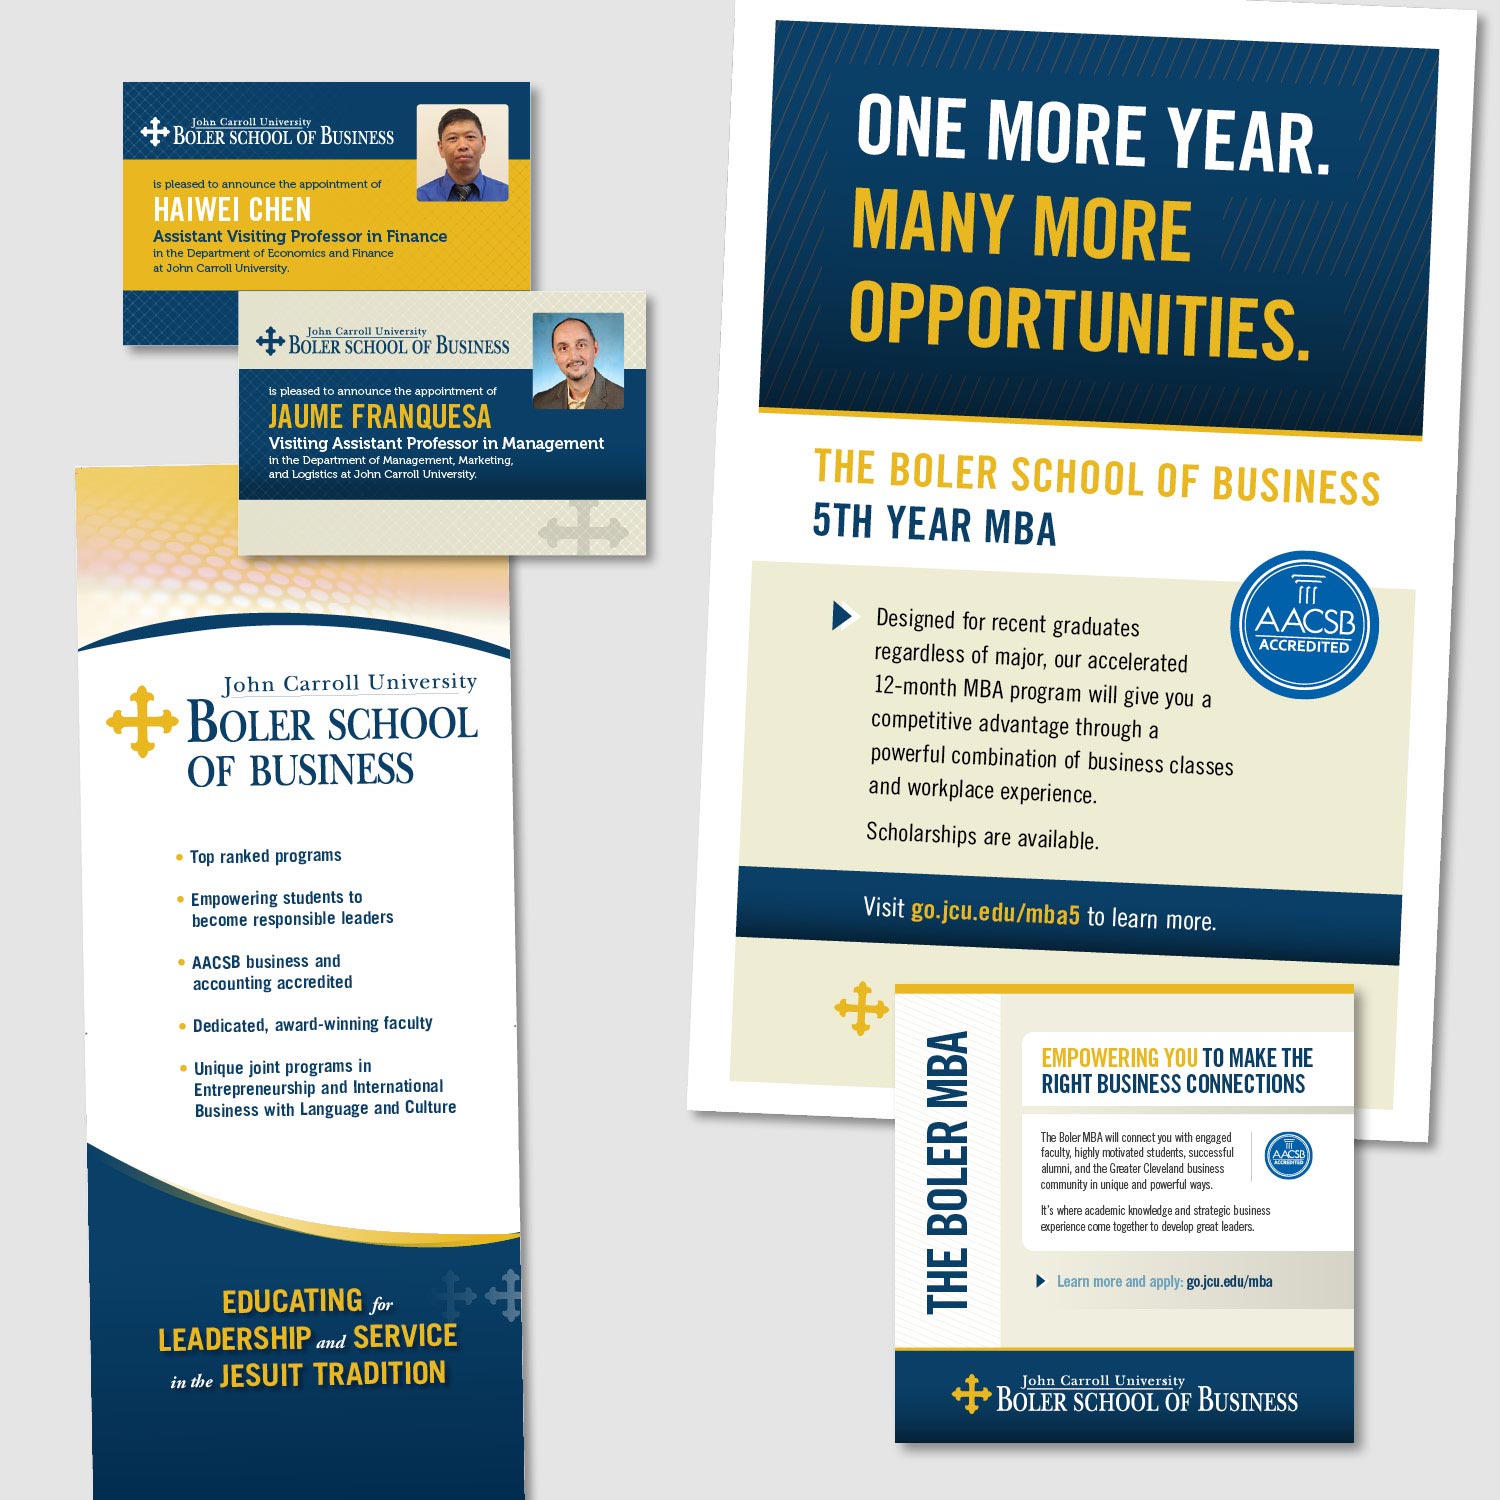  Working within brand guidelines and colors, I designed multiple layouts for the Boler School of Business at John Carroll University. Pieces include: ads, posters, banner stands, postcards, and more. 